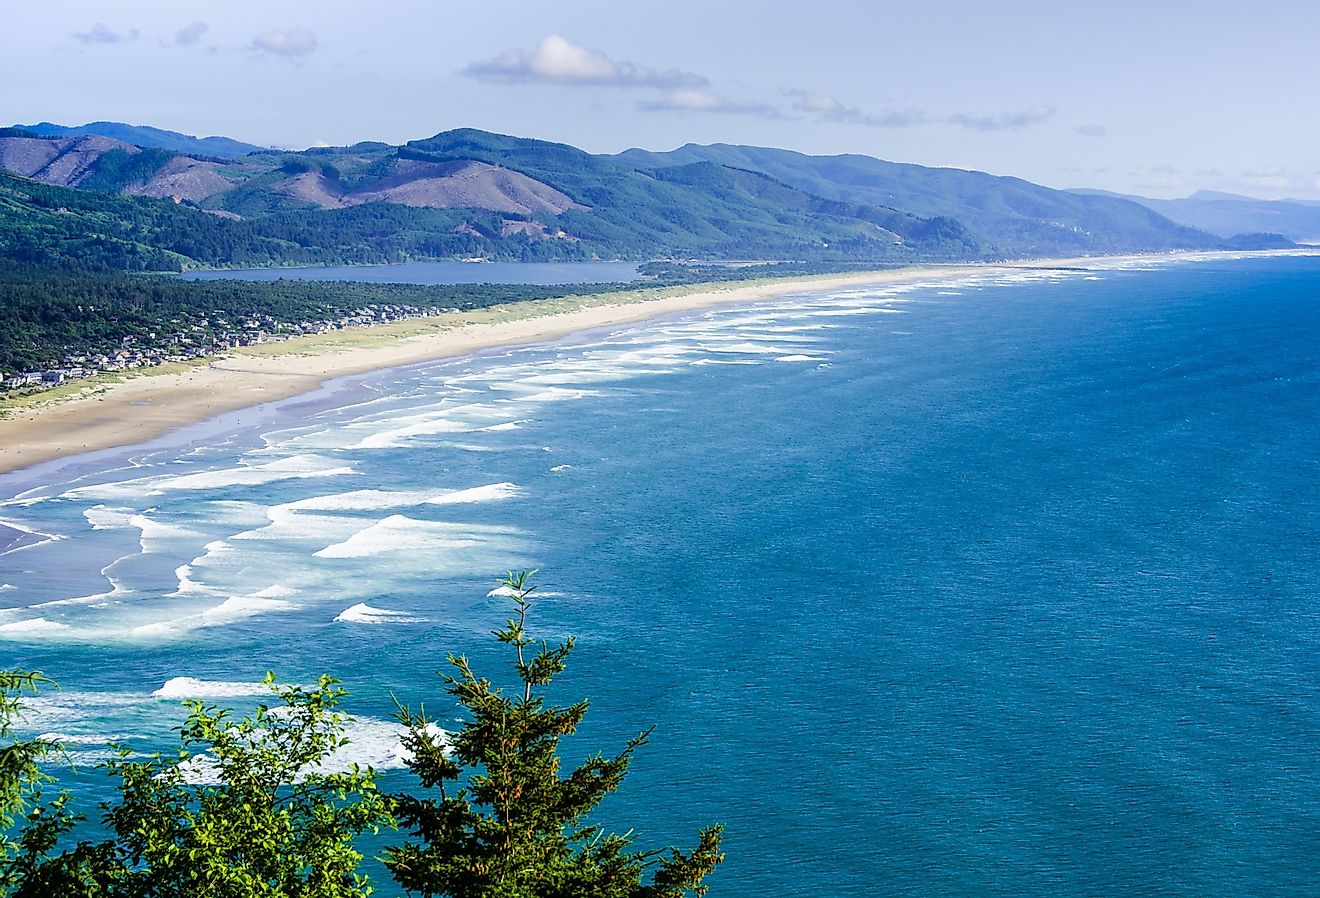 Rockaway Beach has seven miles of a sandy shoreline and is one of the most popular vacation destinations in Oregon.